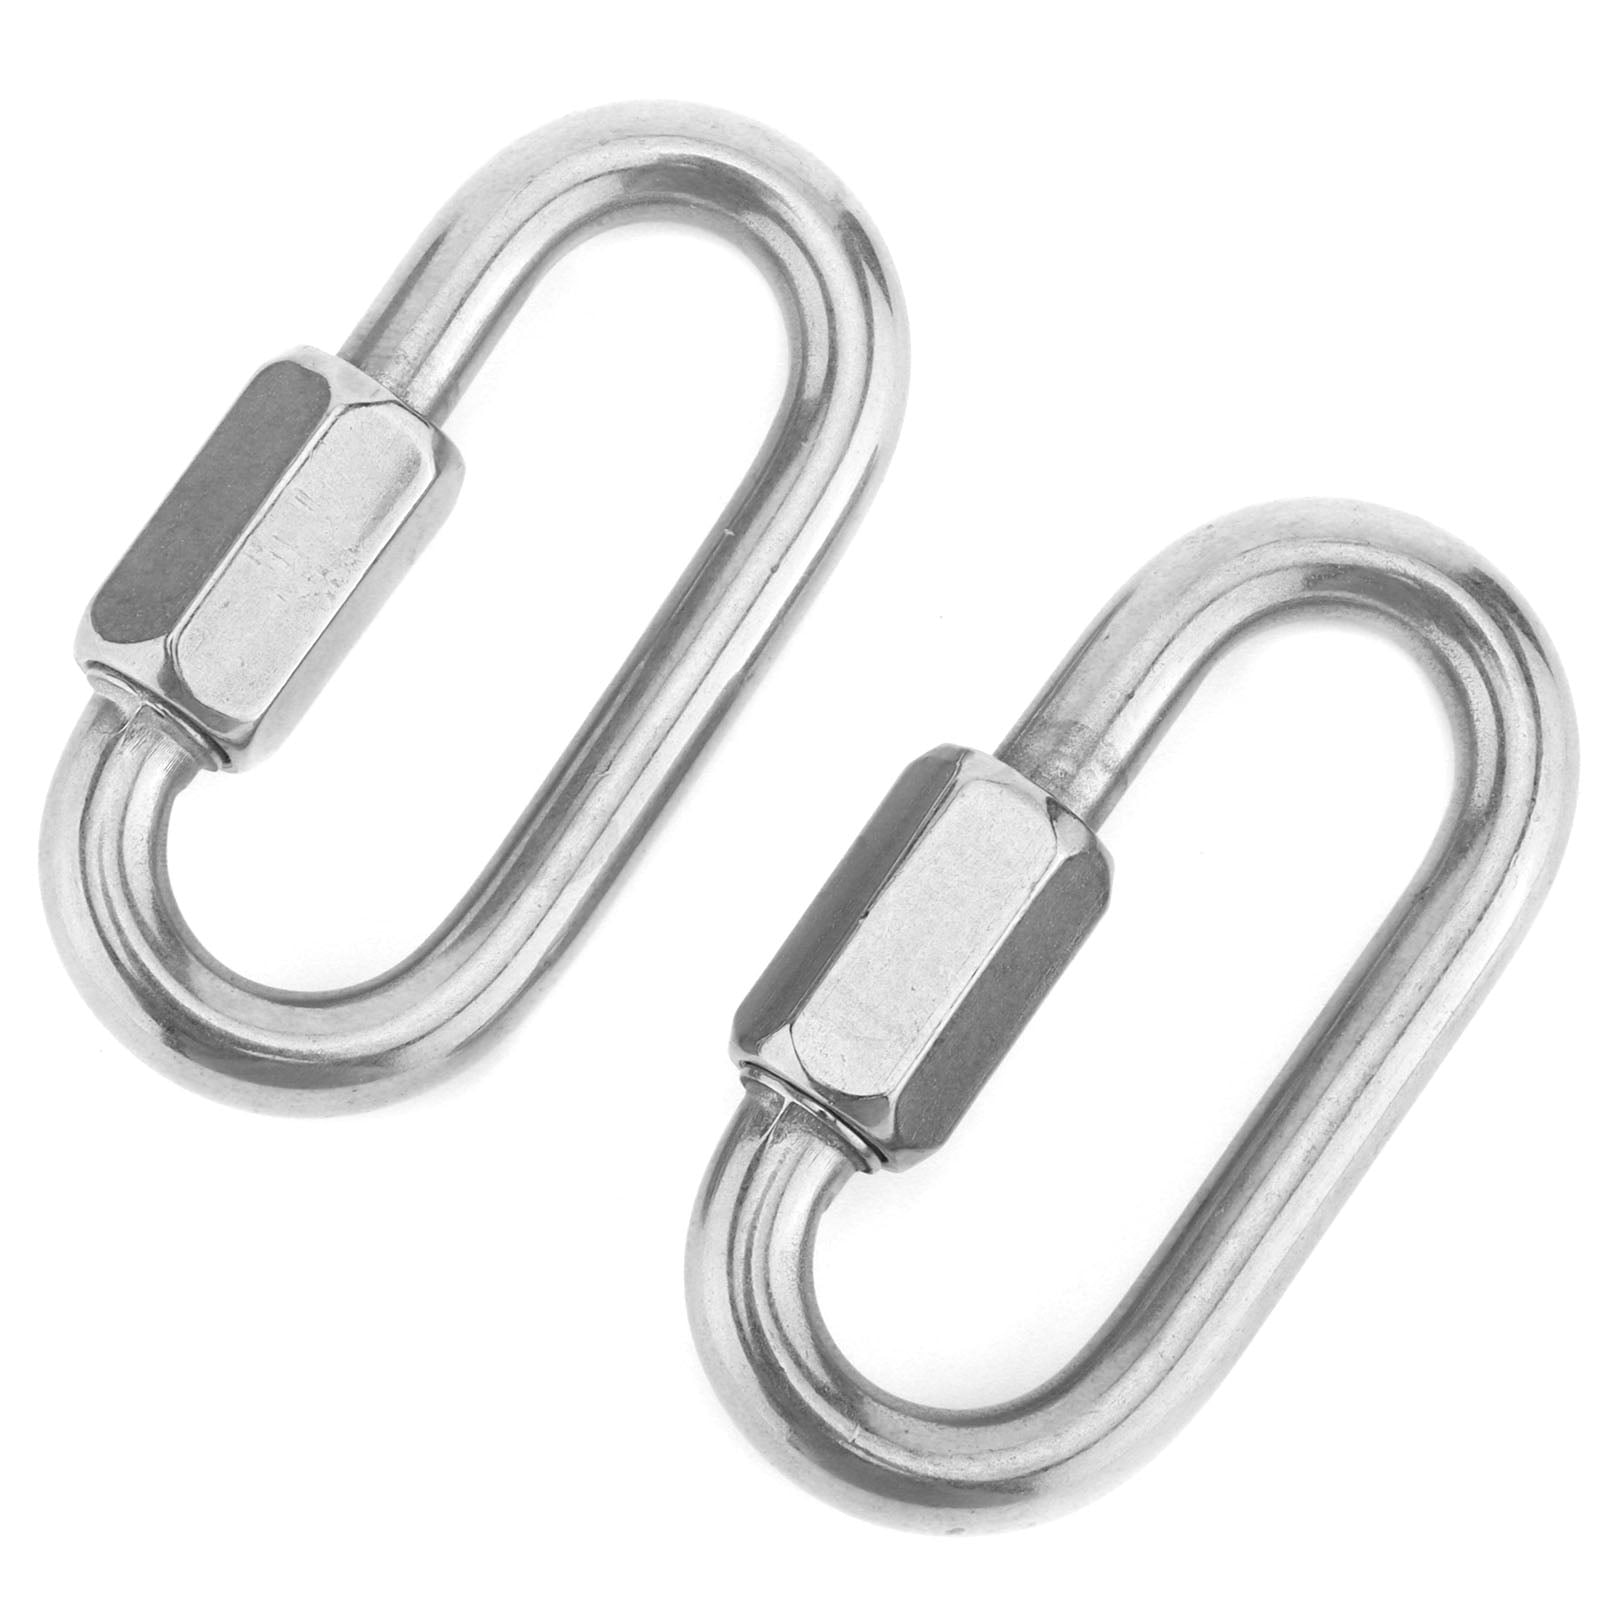 Stainless Steel Screw Lock Climbing Gear Carabiner Quick Links Safety Snap Hook 